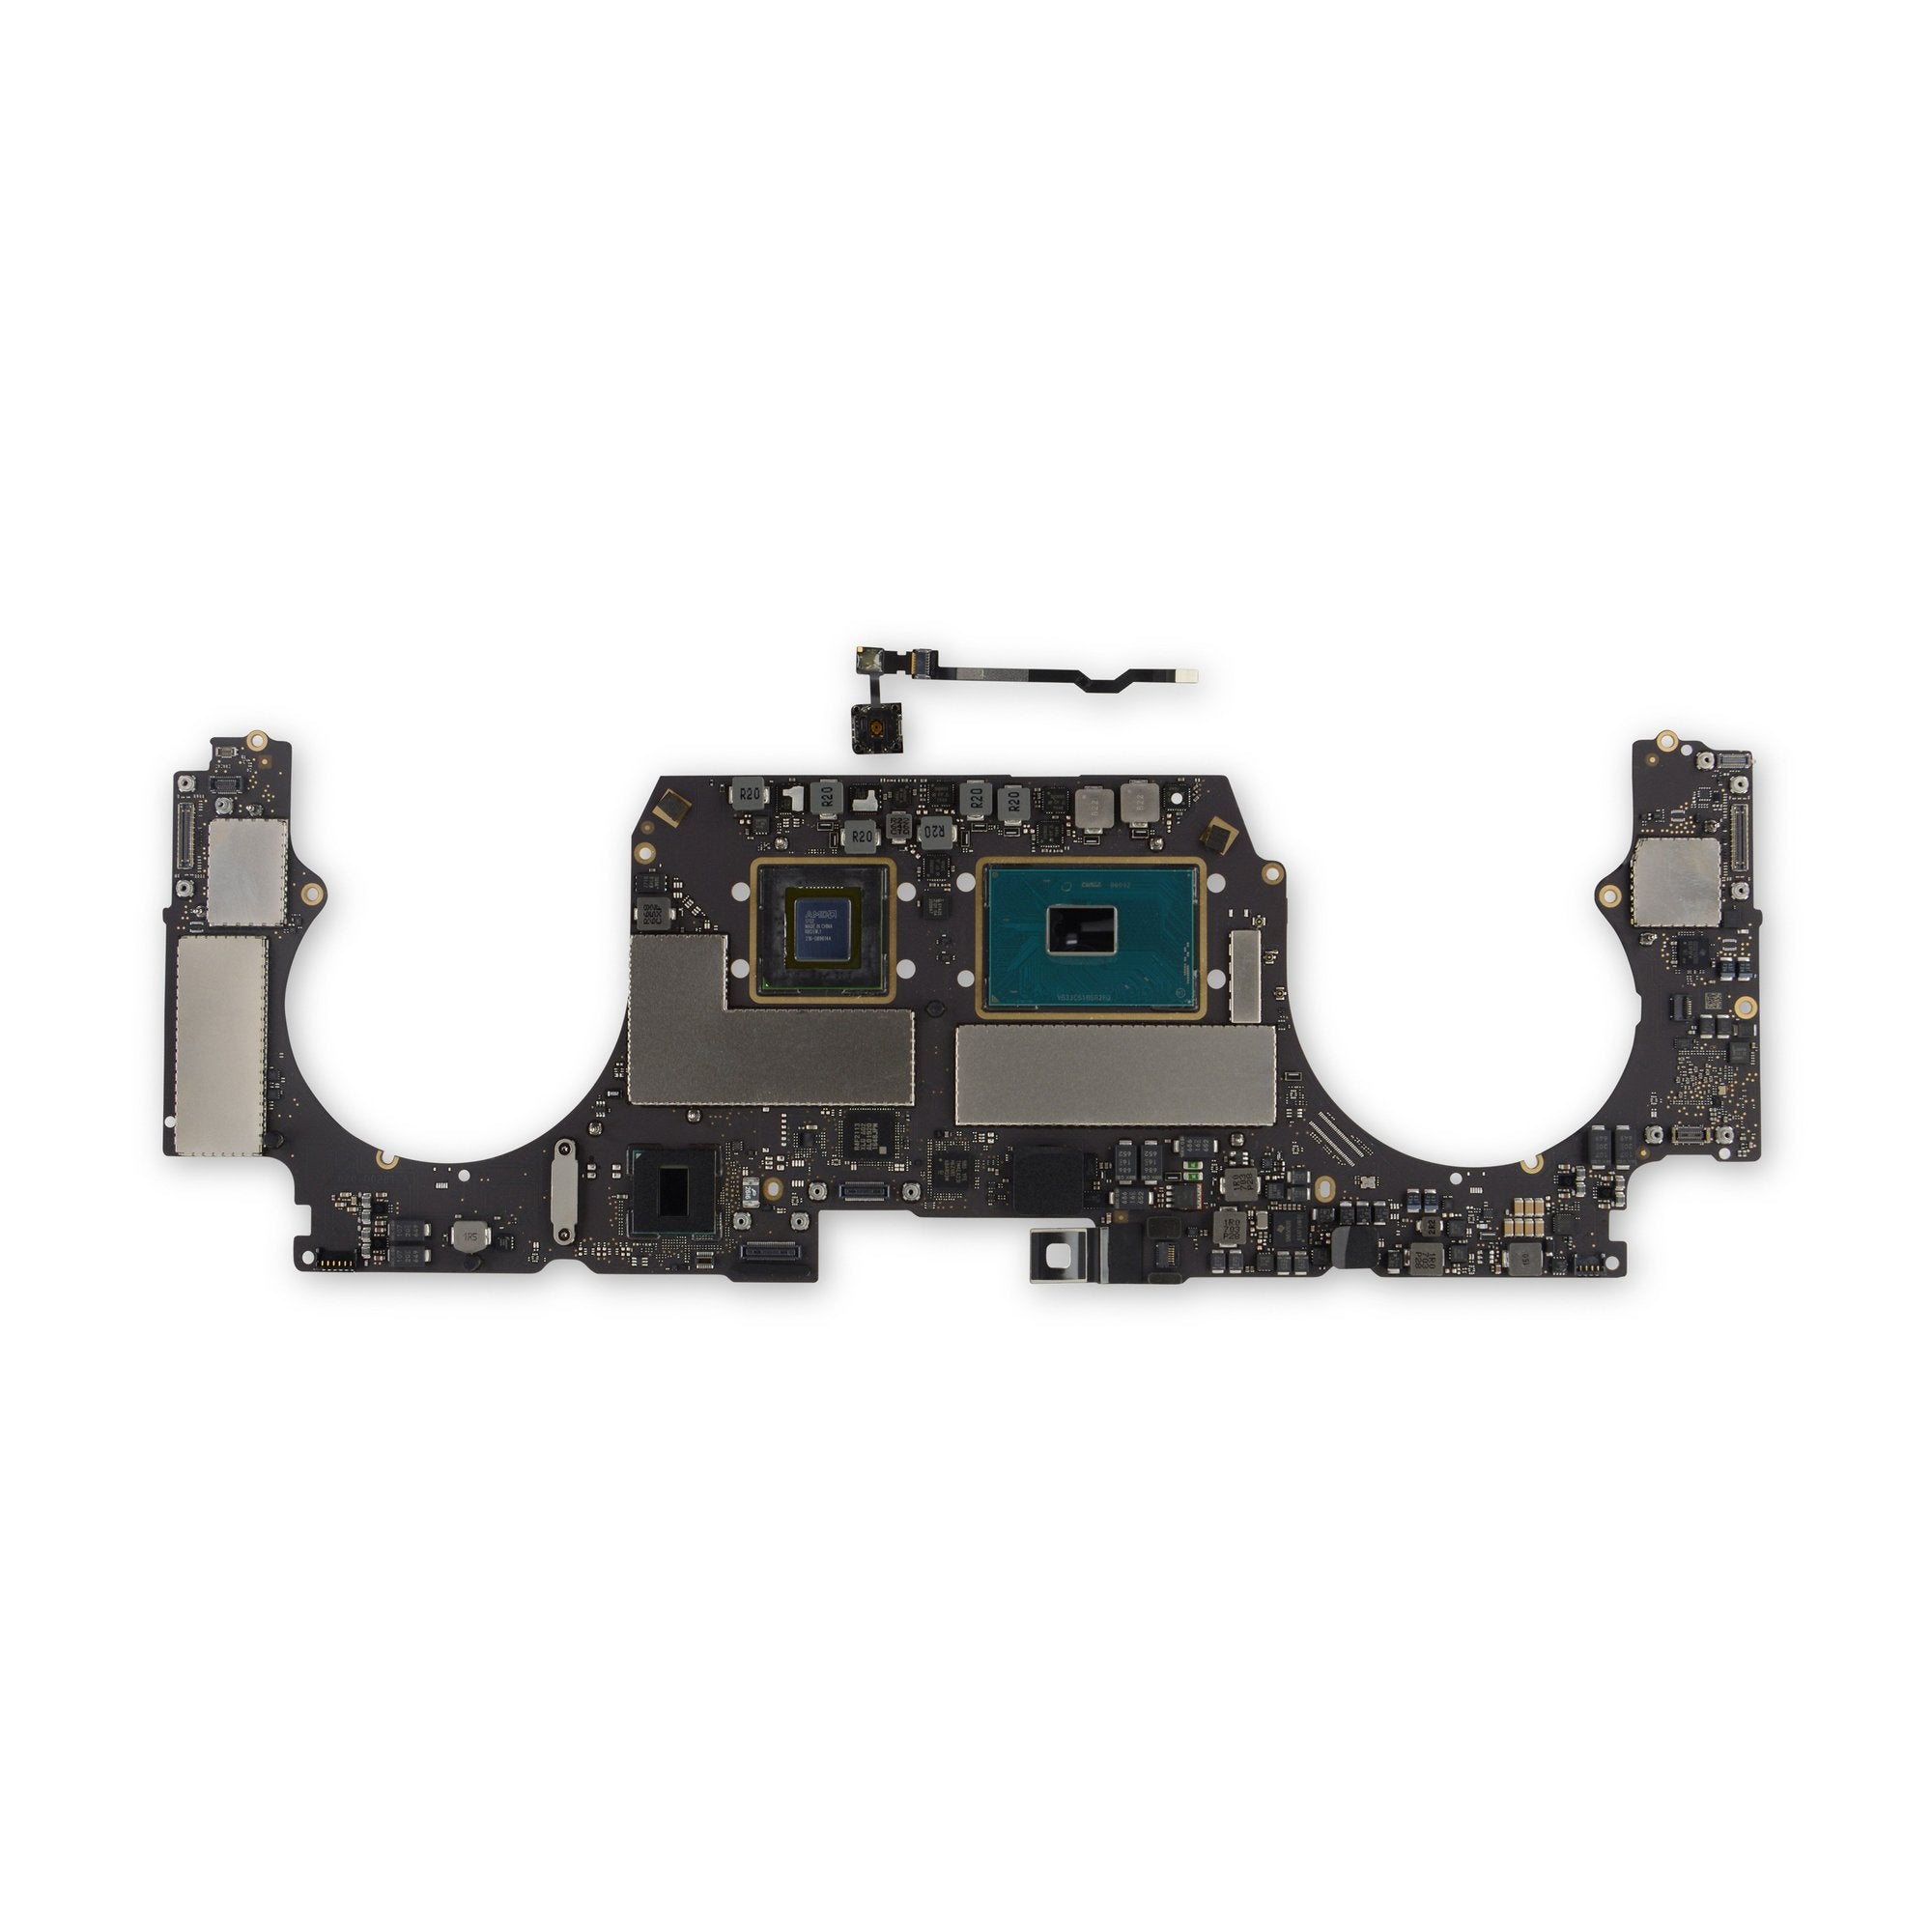 MacBook Pro 15" Retina (Late 2016) 2.9 GHz Logic Board, Radeon Pro 455, with Paired Touch ID Sensor 512 GB Used